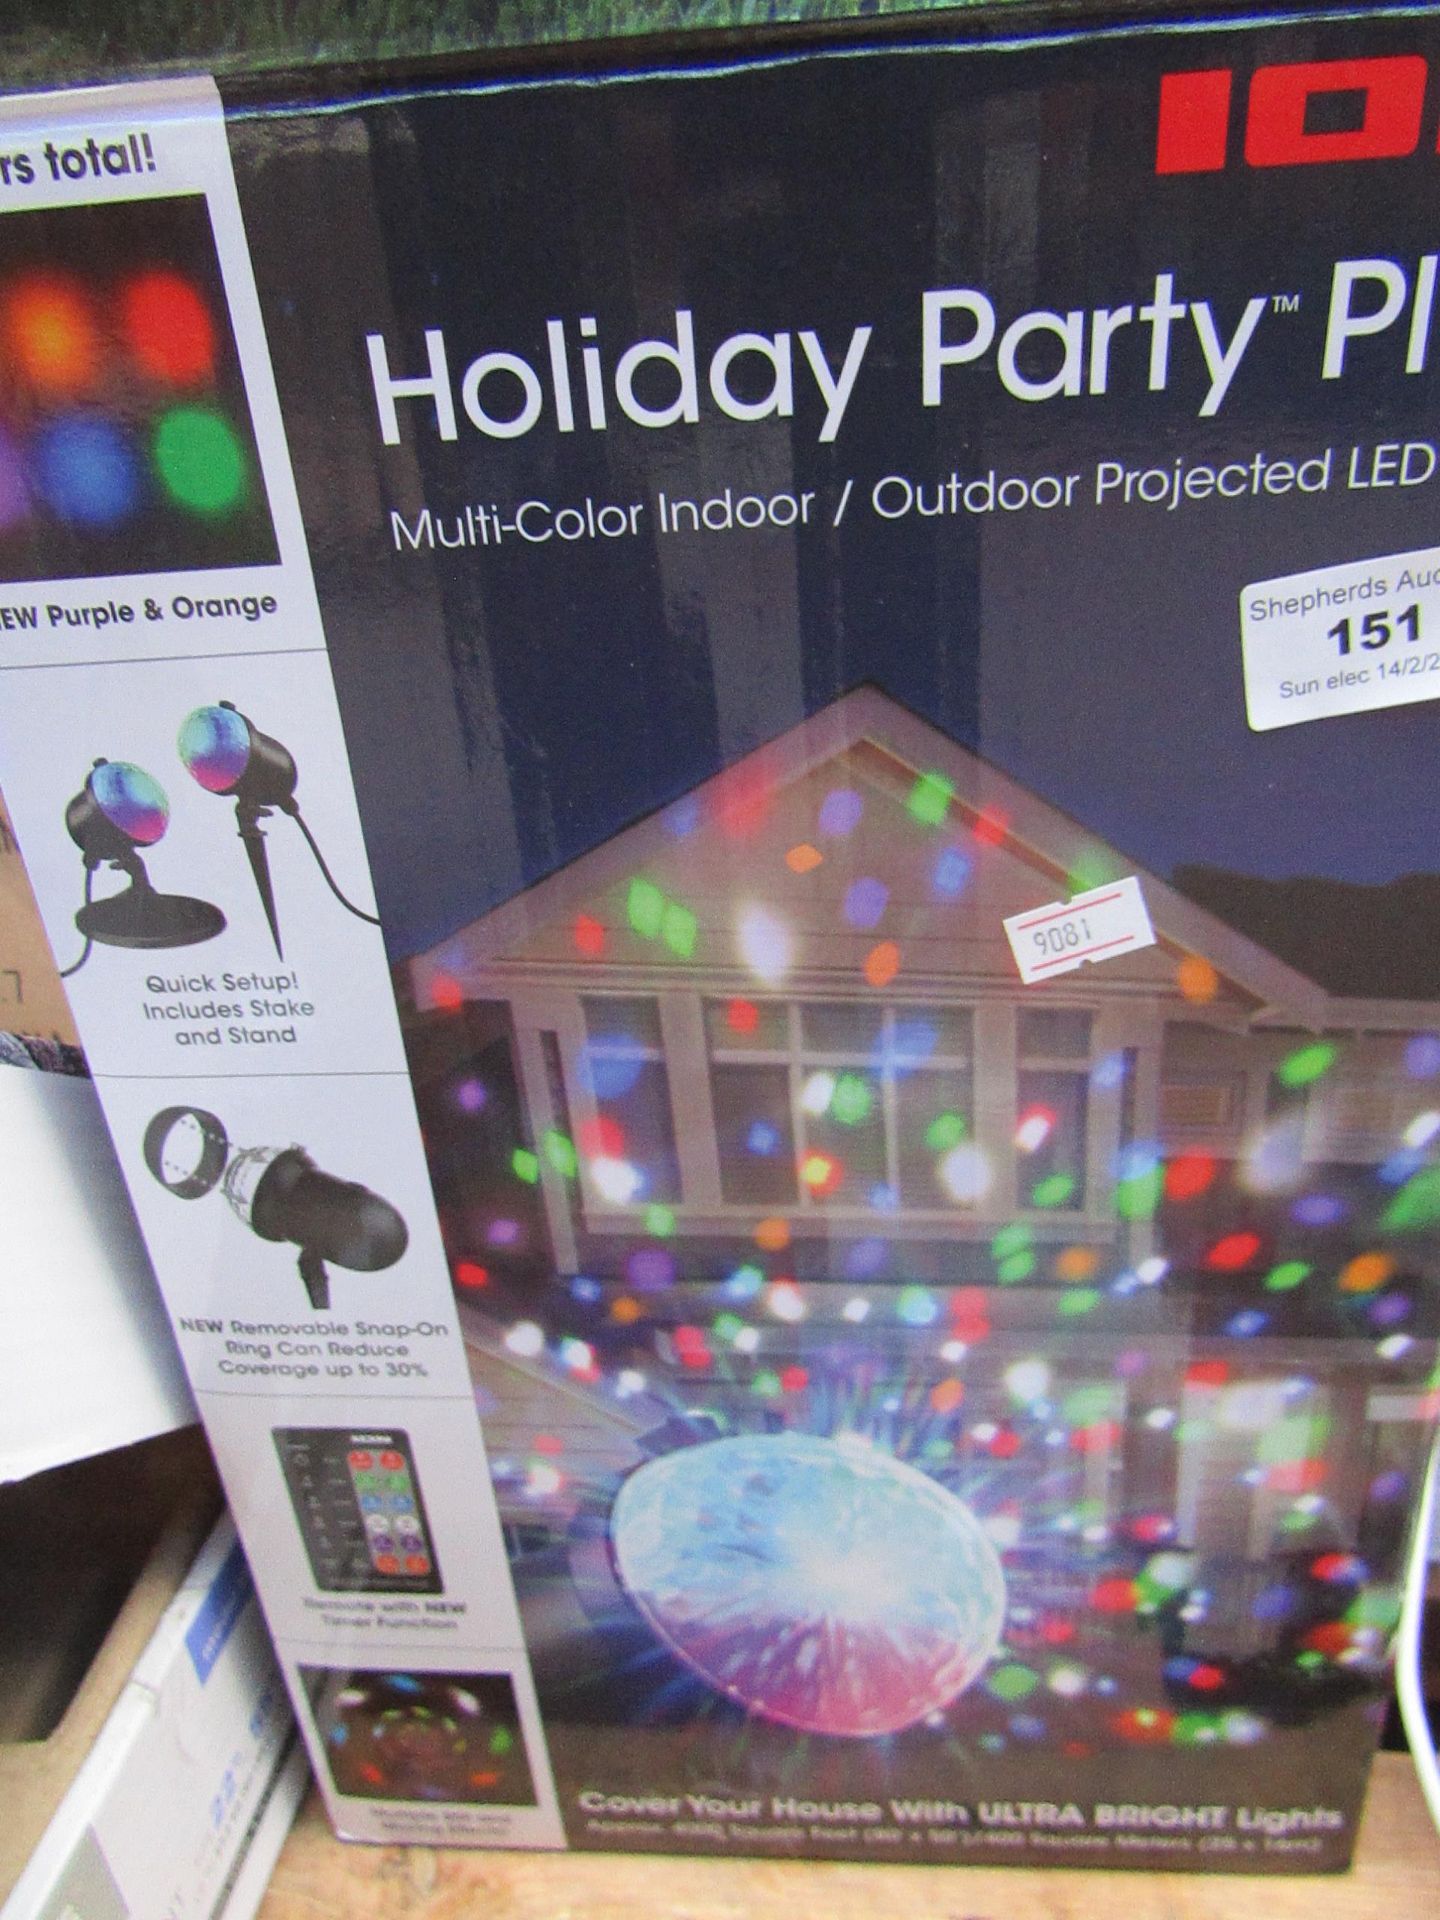 ION holiday party plus indoor/ outdoor projected LED light, no power and boxed.